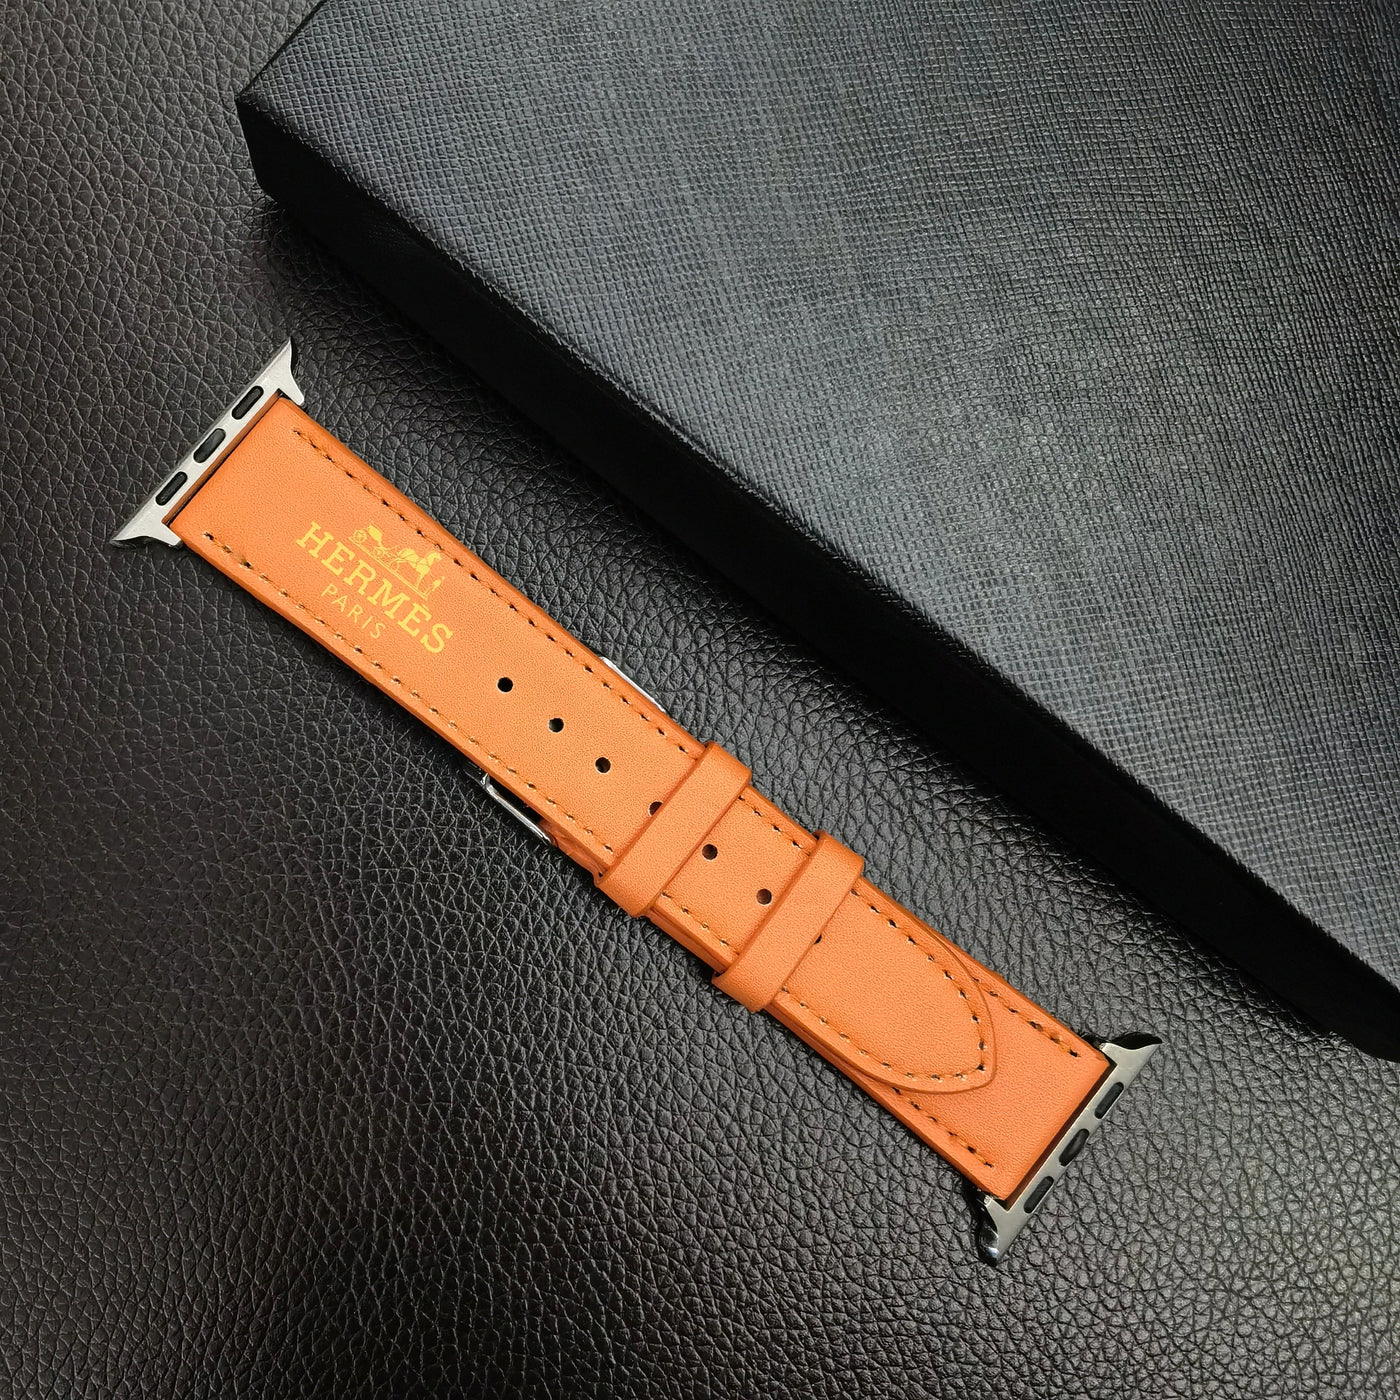 Classic buckle closure Apple Watch strap with Hermes-inspired detailing